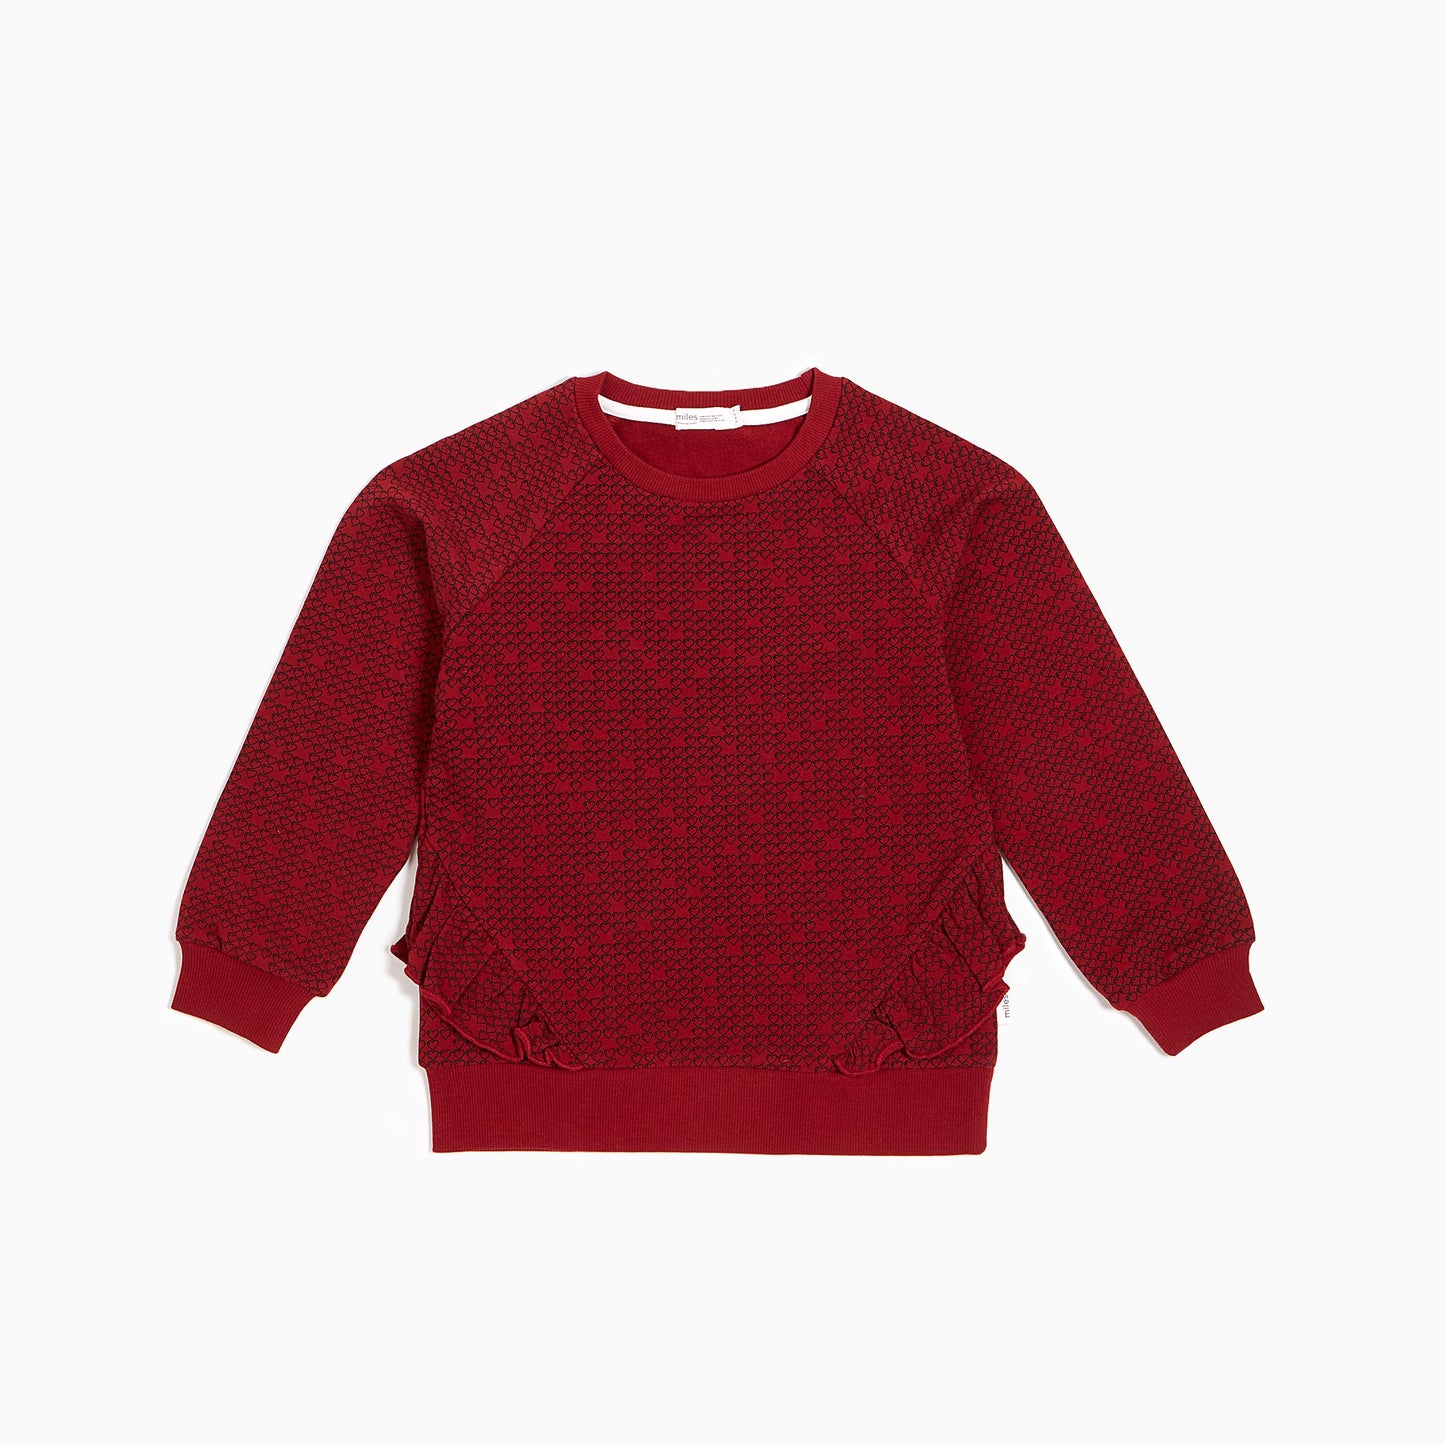 Red Pixel Heart Ruffled Crew Neck Sweater  - Doodlebug's Children's Boutique